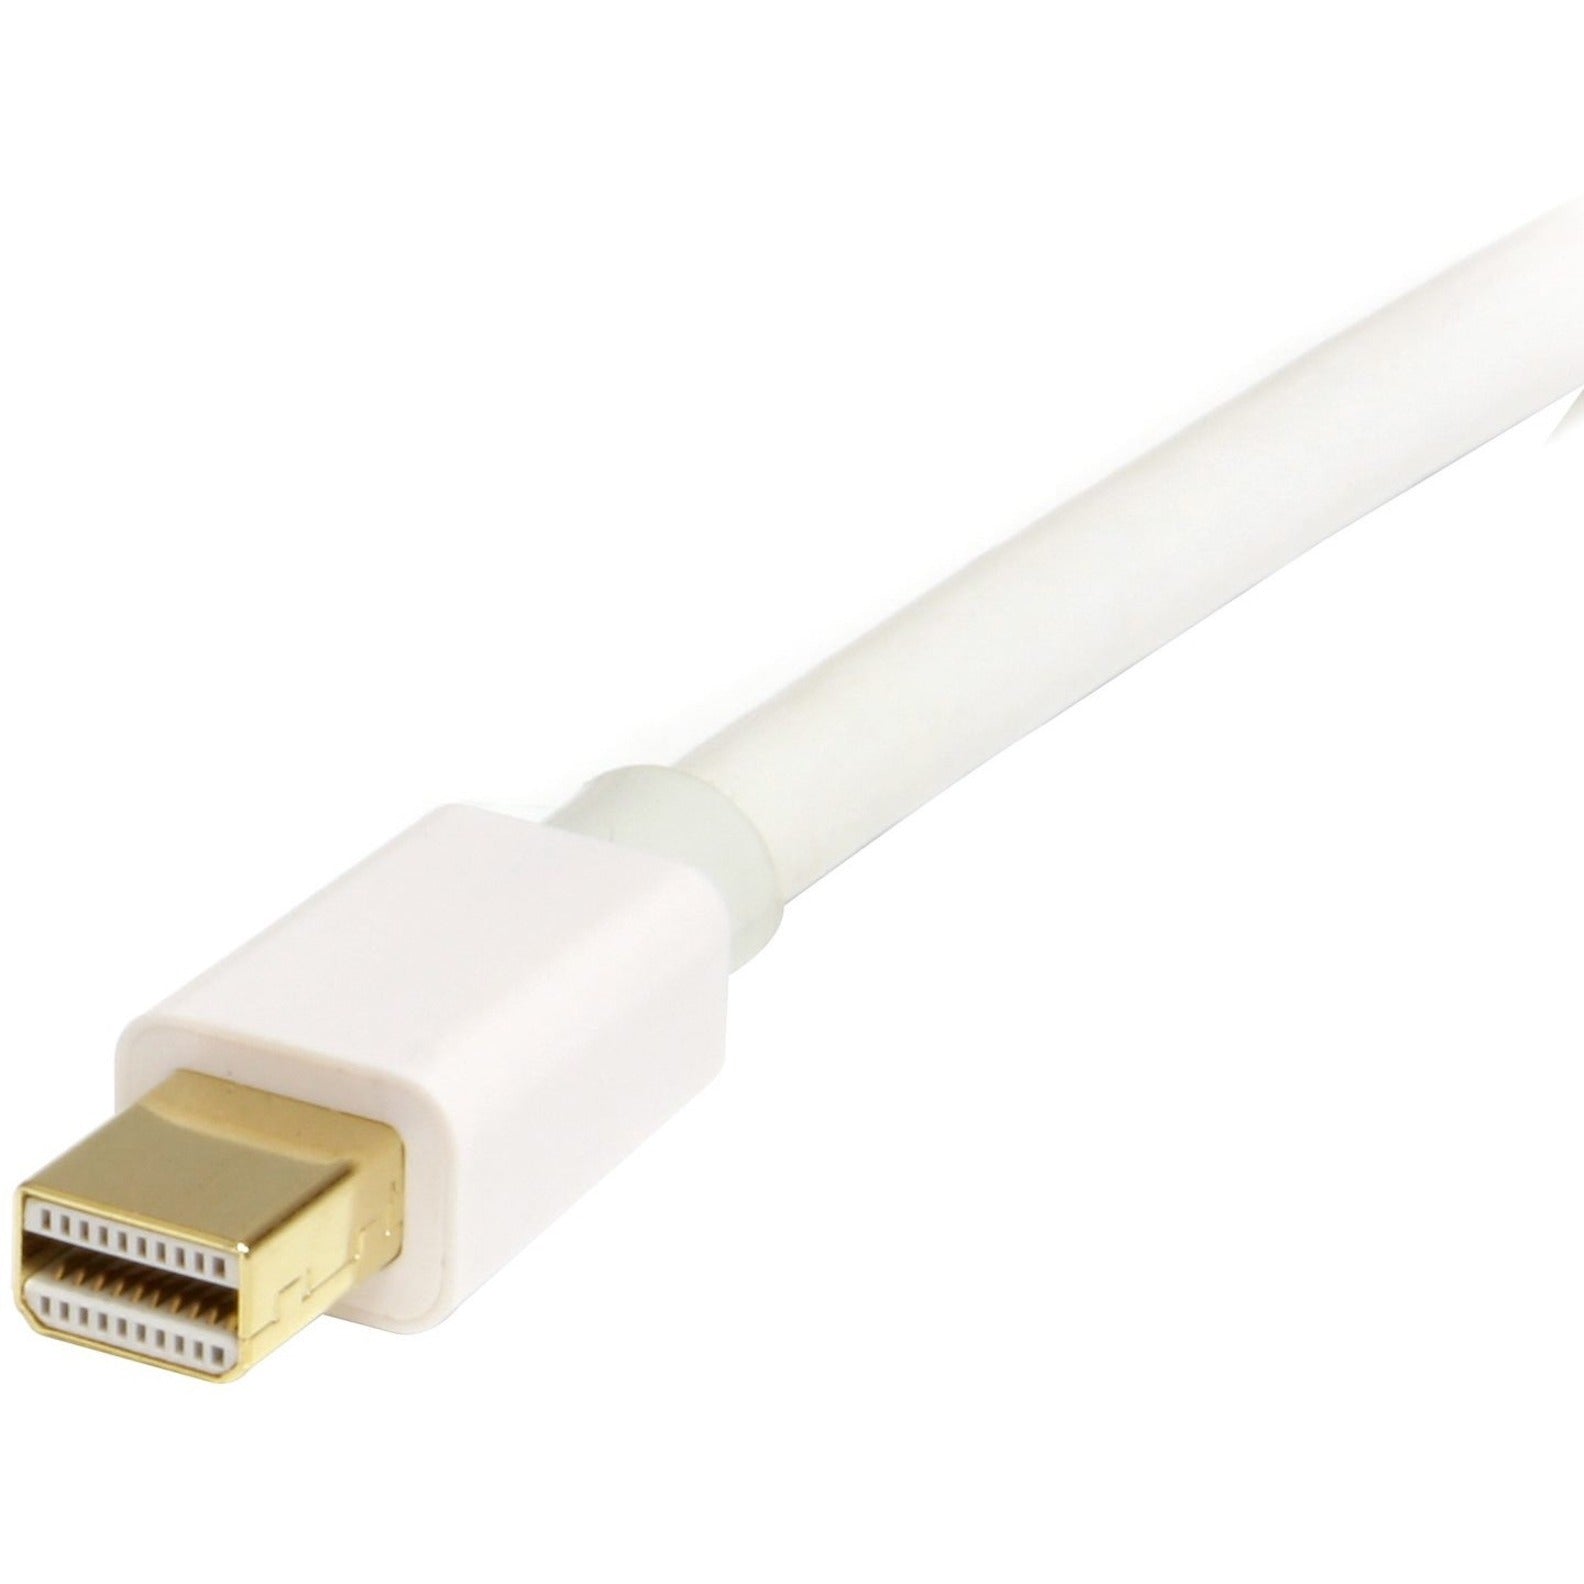 StarTech.com MDP2DPMM1MW Mini DisplayPort to DisplayPort Cable, 3.28 ft, Damage Resistant, Gold Plated, 21.6 Gbit/s